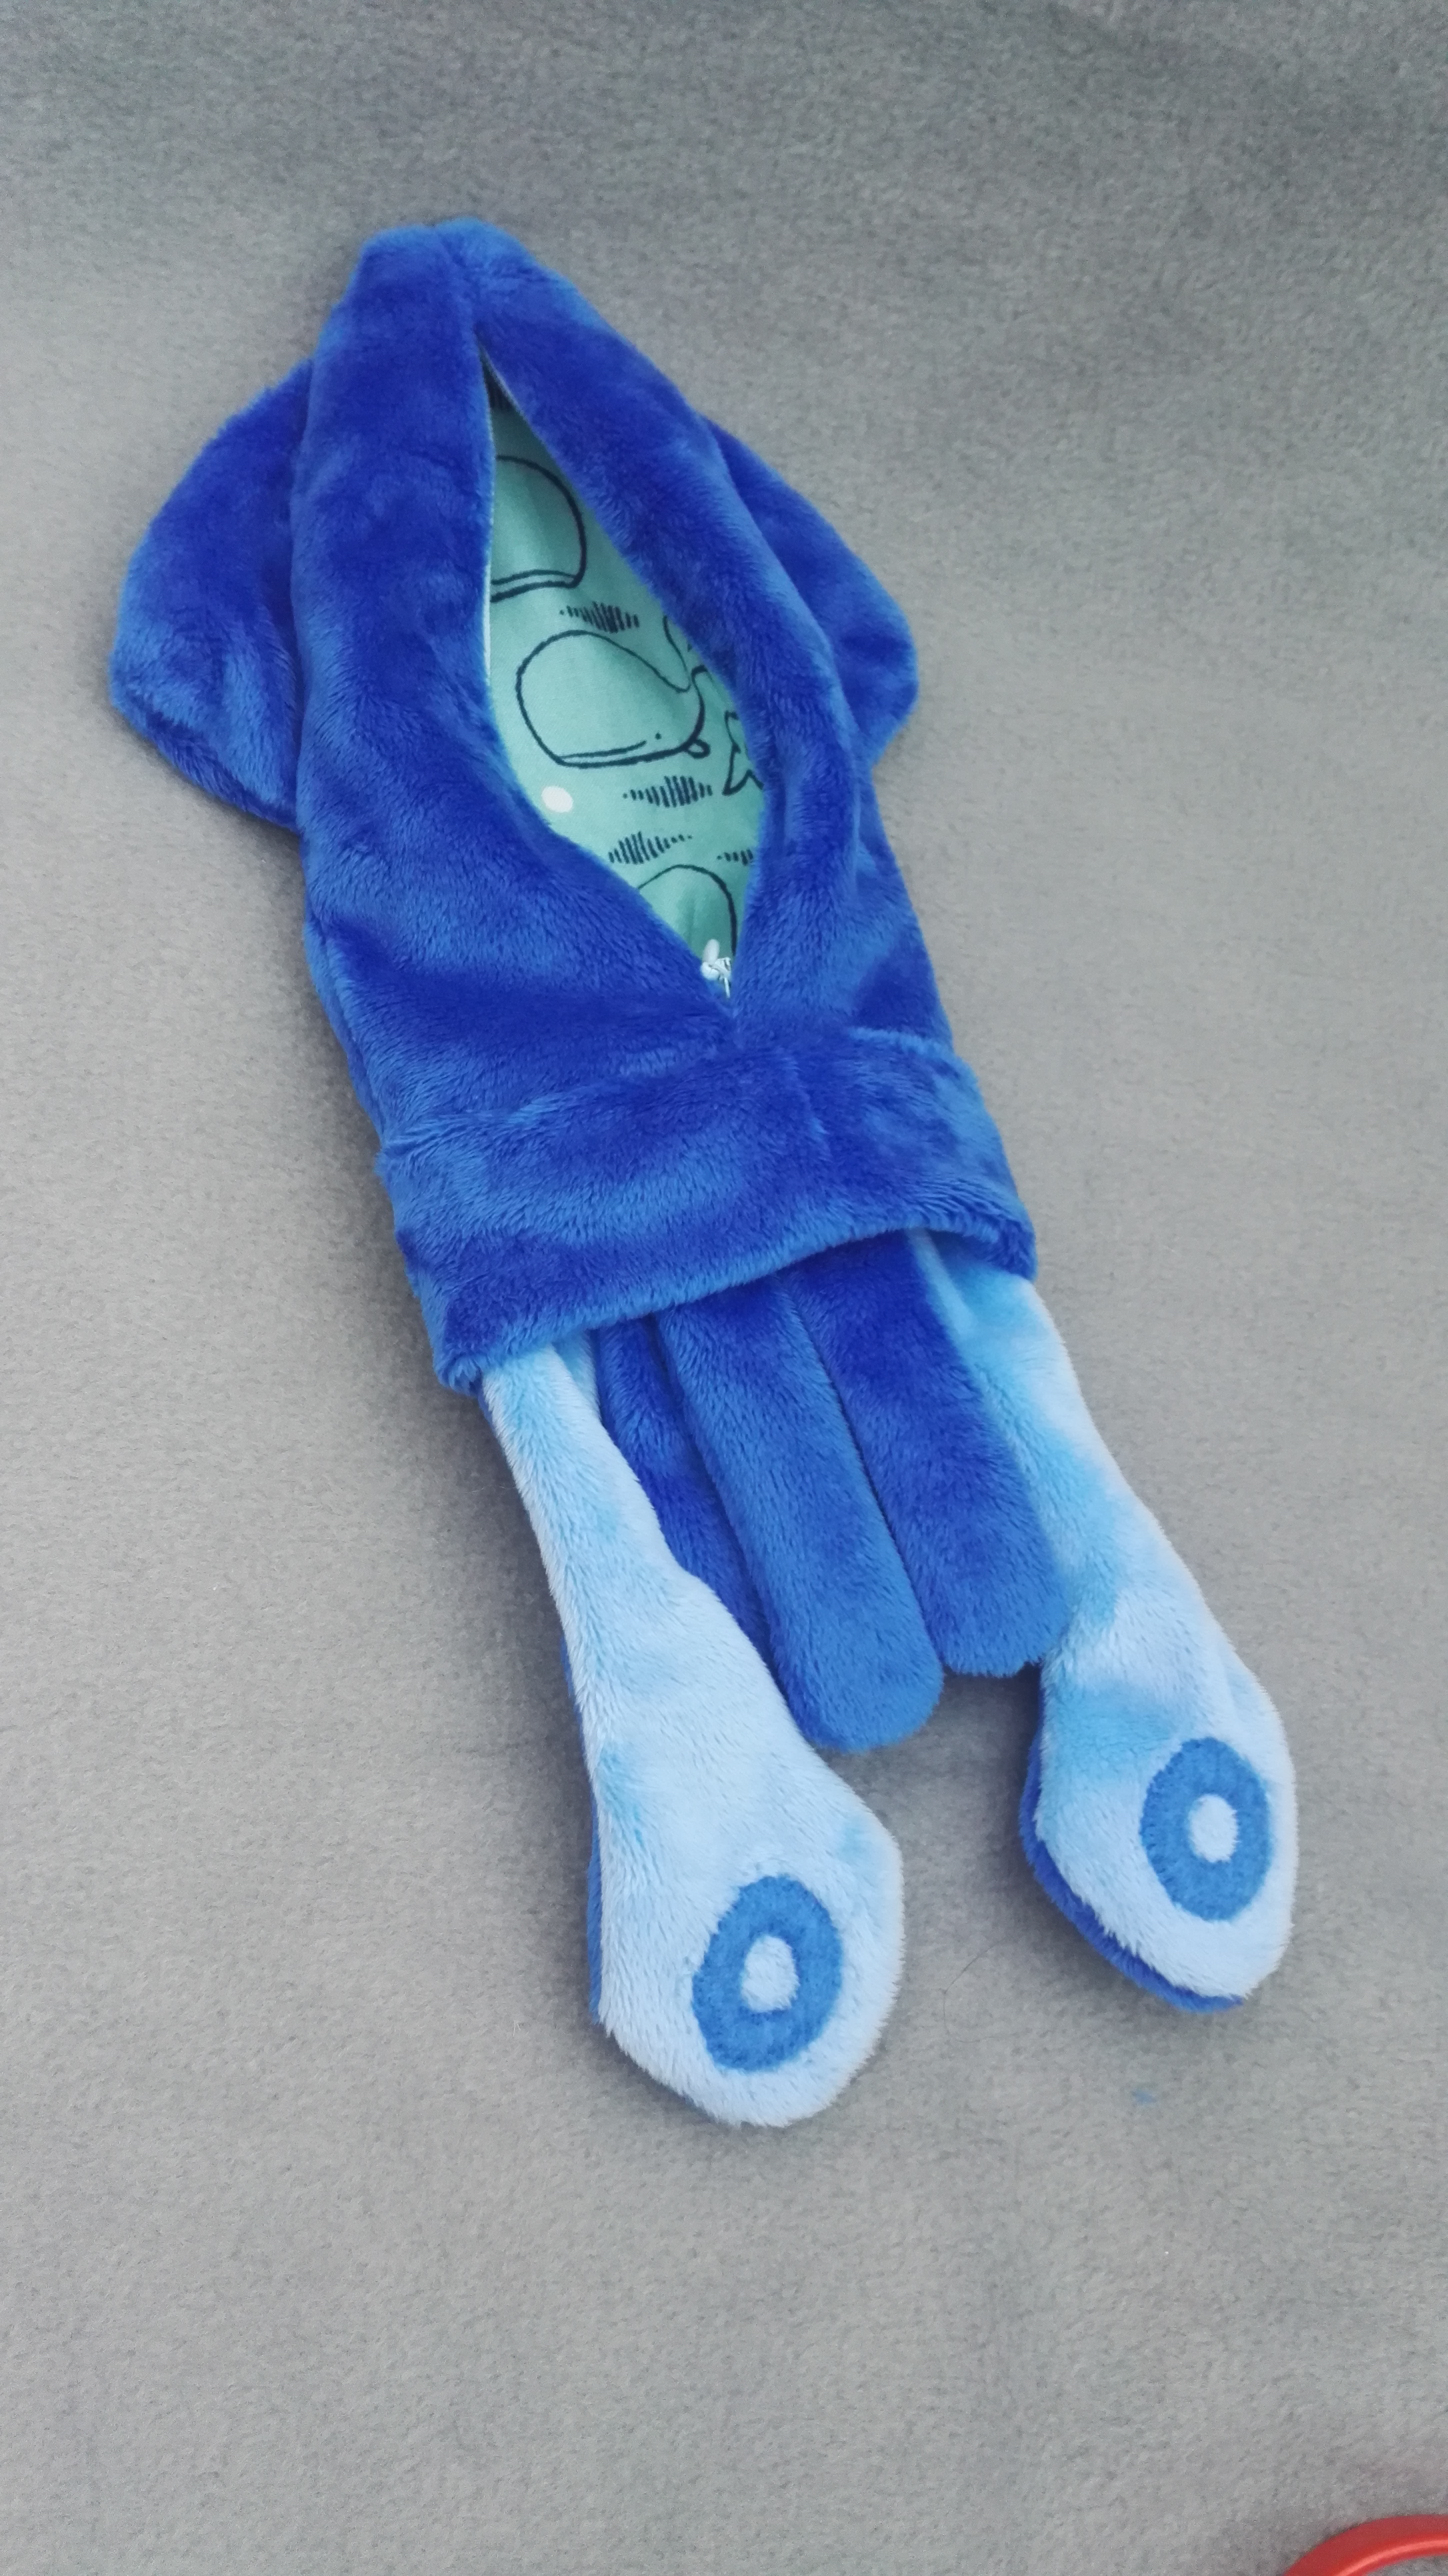 the reverse of the blue squid pouch, showing off the light blue tentacle side and cotton lining with whales on it